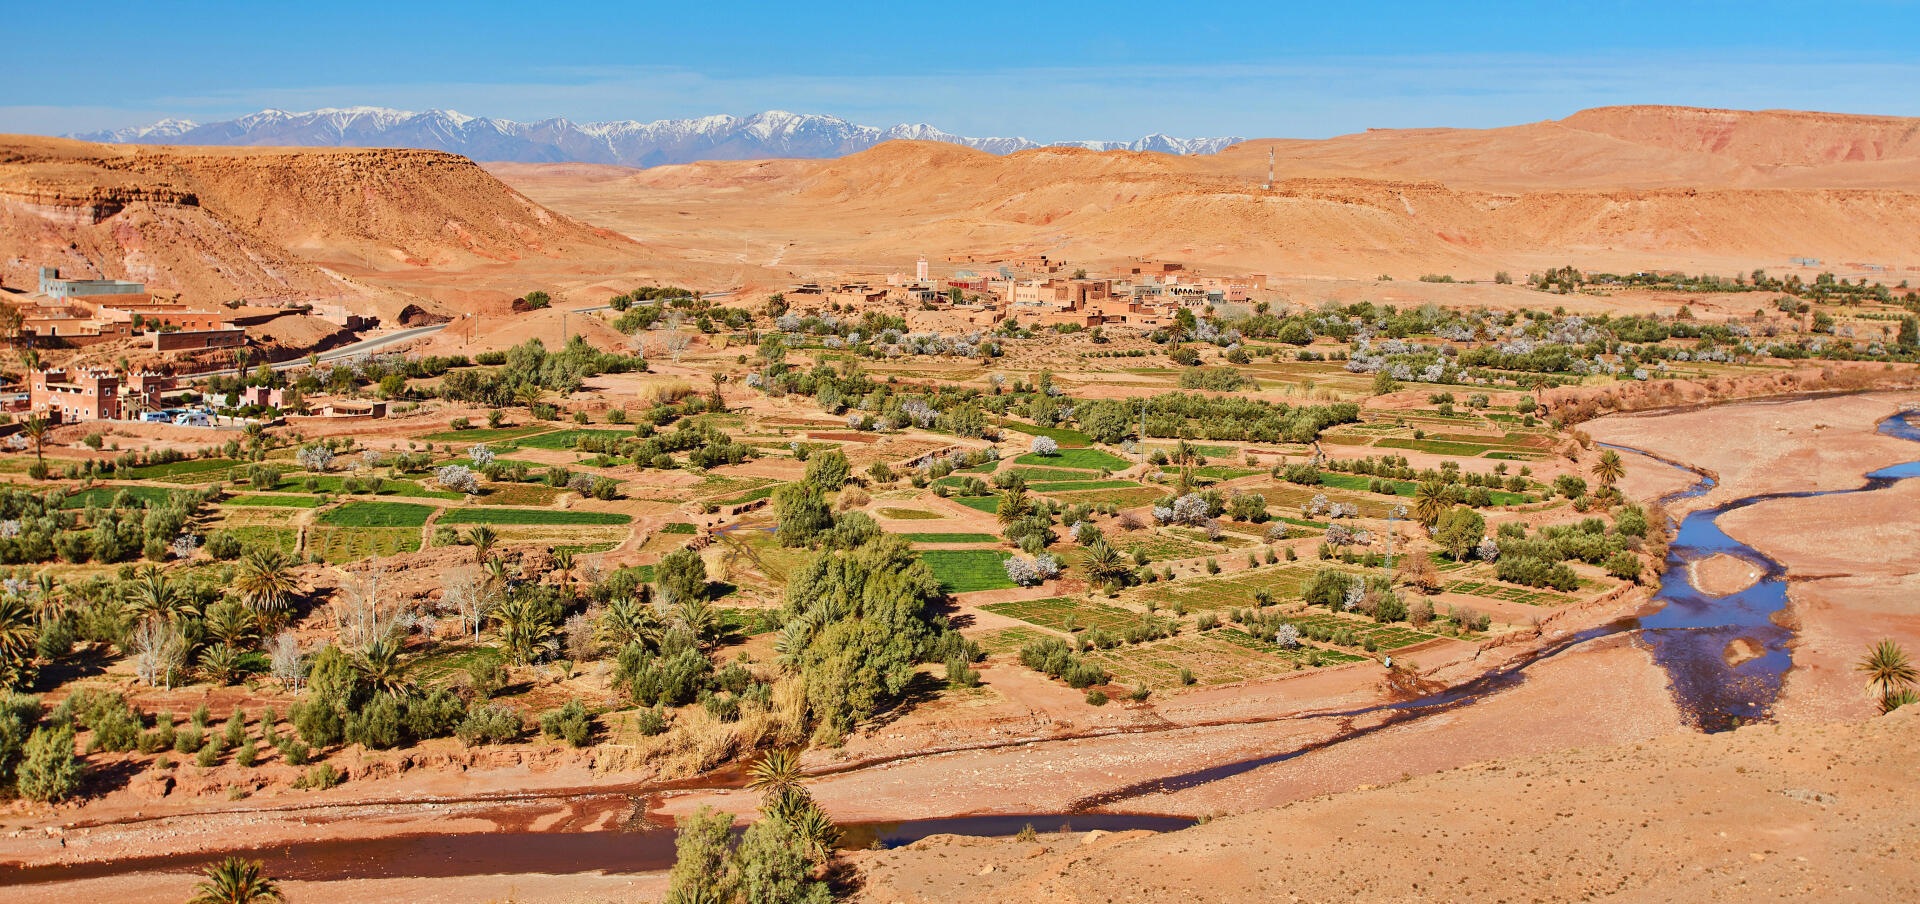 Trekking in Morocco: the routes to follow